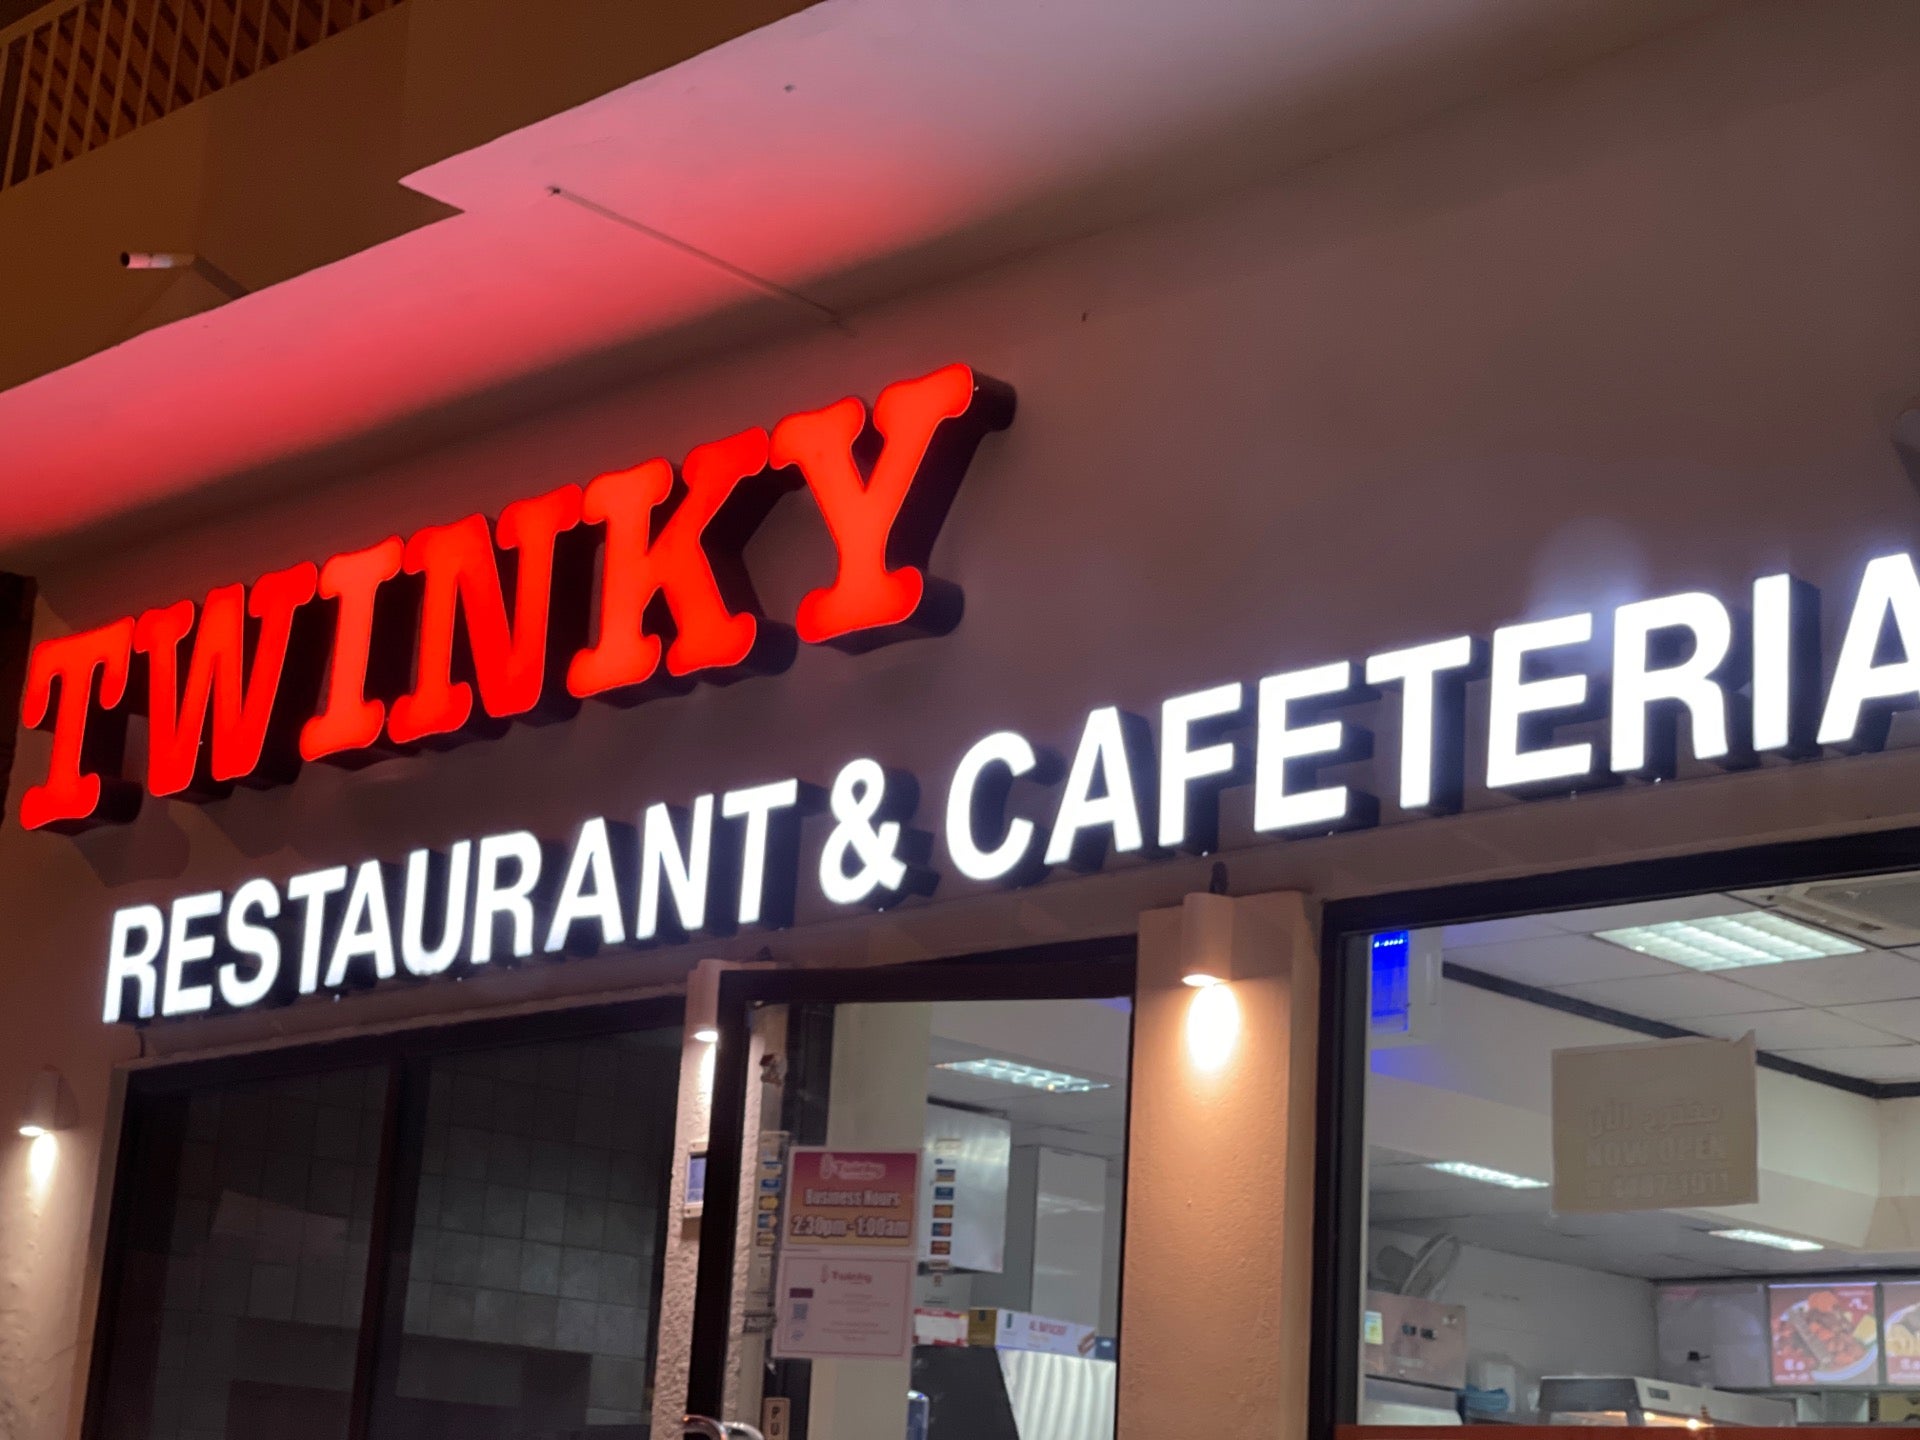 Twinky Restaurant & Cafeteria